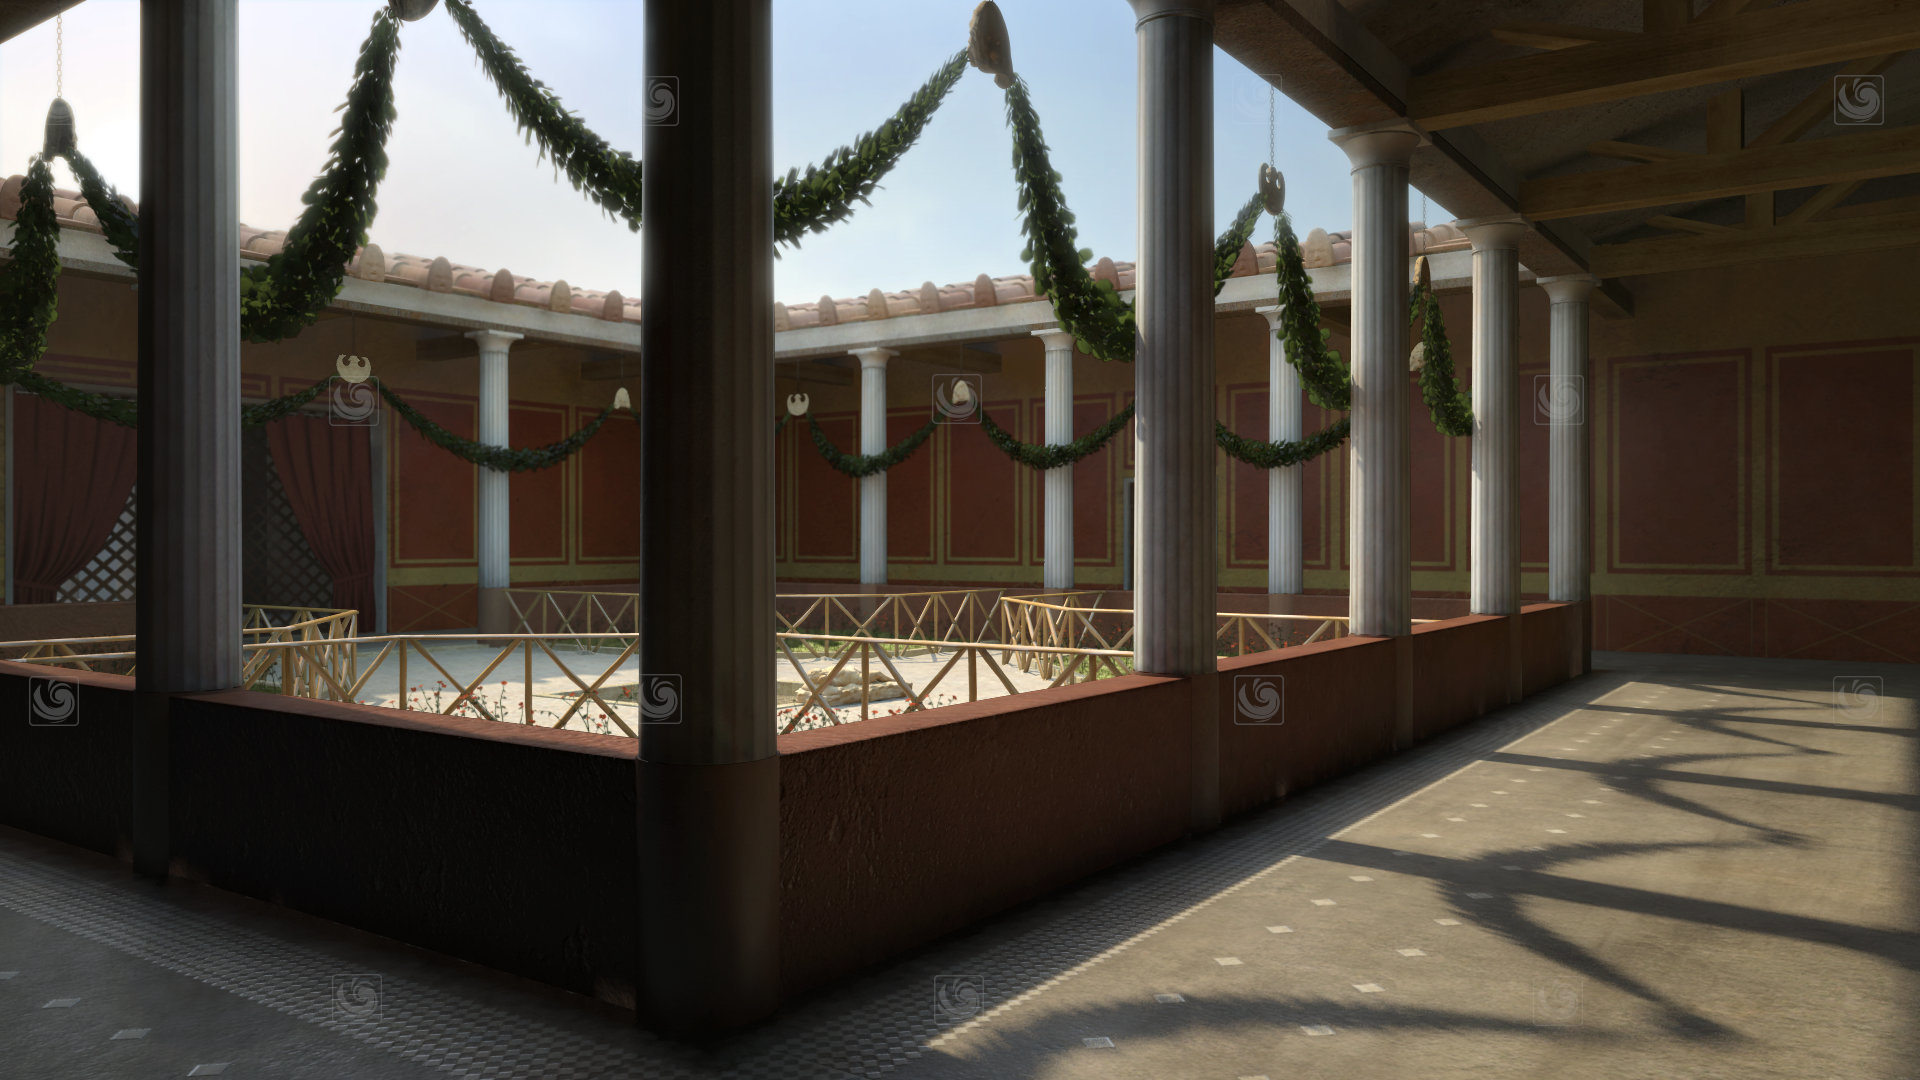 3D animation frame with a subjective view of an ancient Rome courtyard